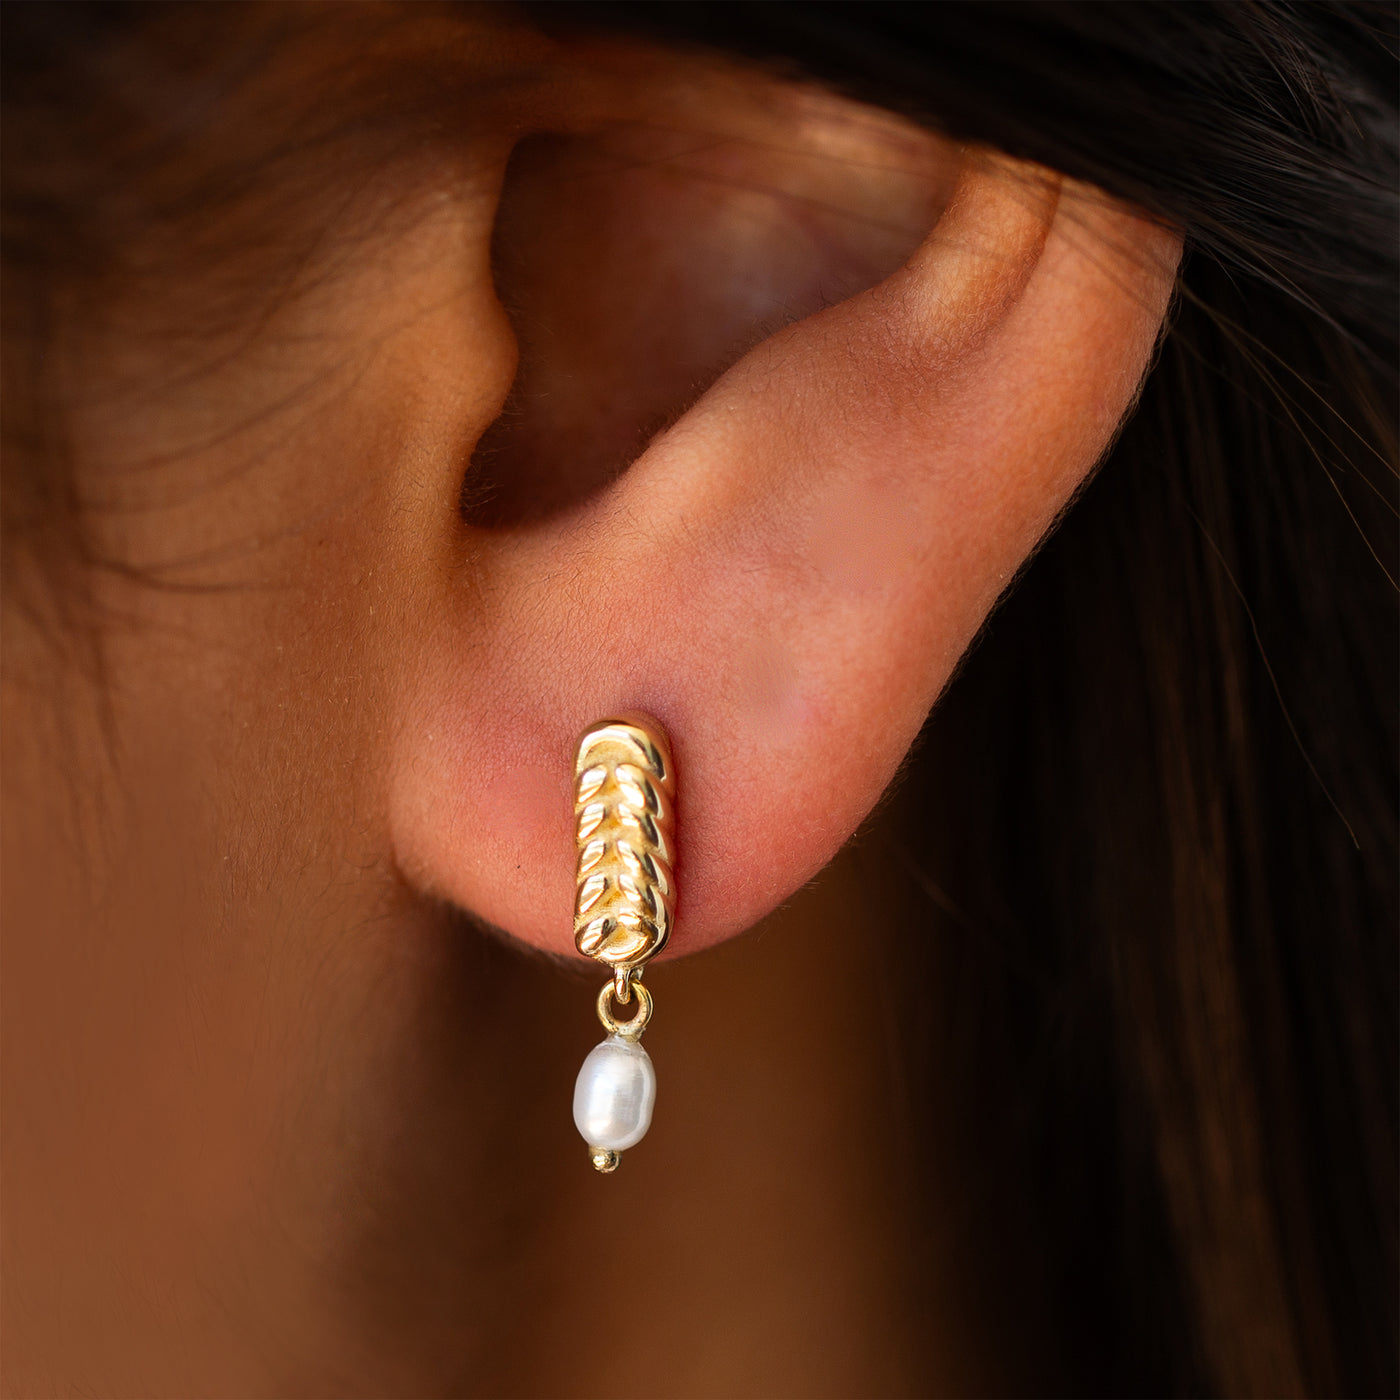 14K Gold Challah Earrings With Pearls